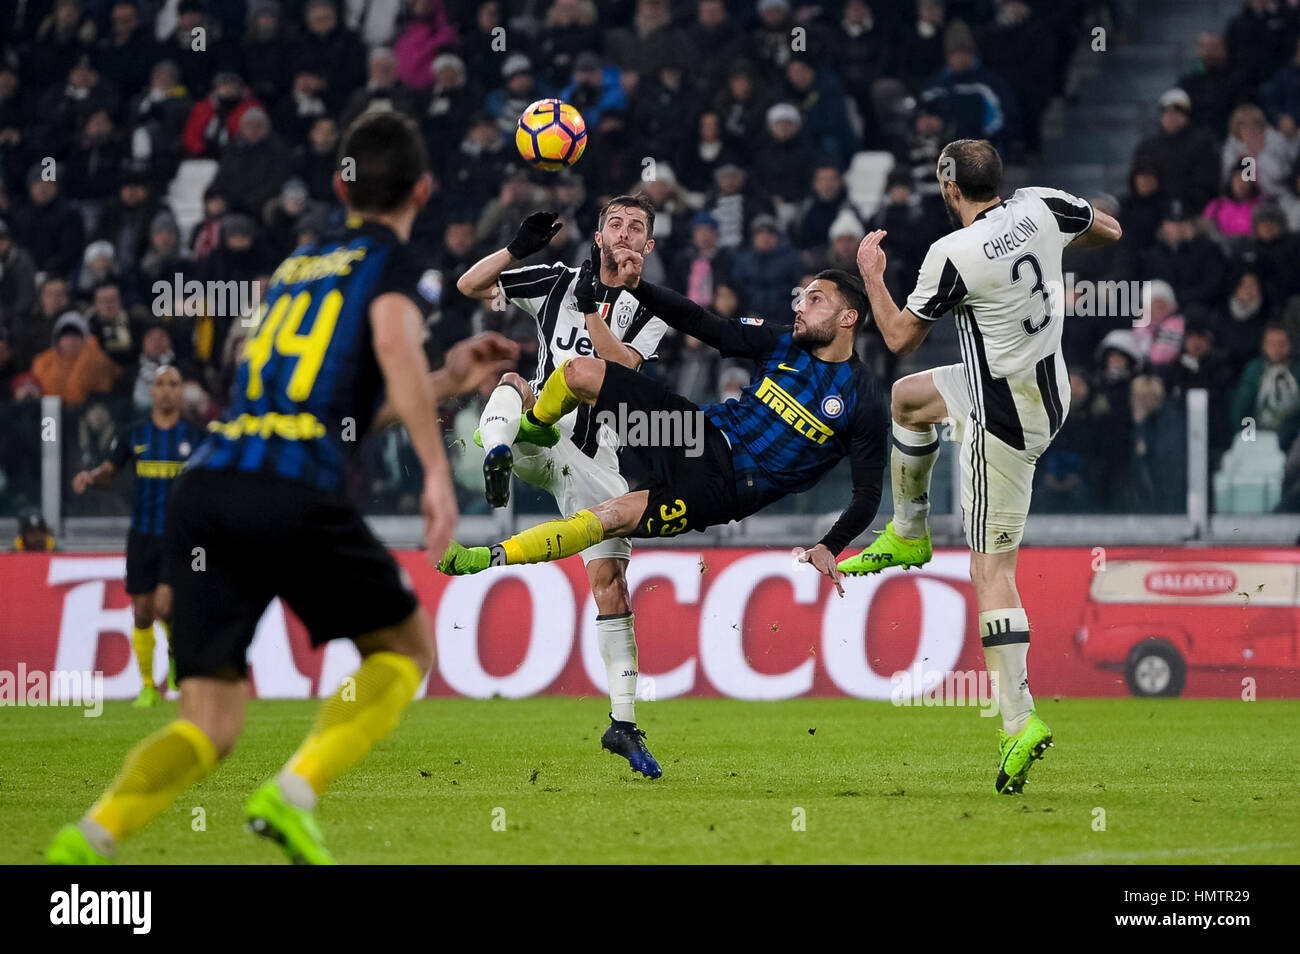 Turin, Italy. 5th Feb, 2017. Danilo D'Ambrosio (center) of FC Internazionale Miralem Pjanic and Giorgio  Chiellini of Juventus FC compete for the ball during the Serie A football match between Juventus FC and FC Internazionale. Credit: Nicolò Campo/Alamy Live News Stock Photo